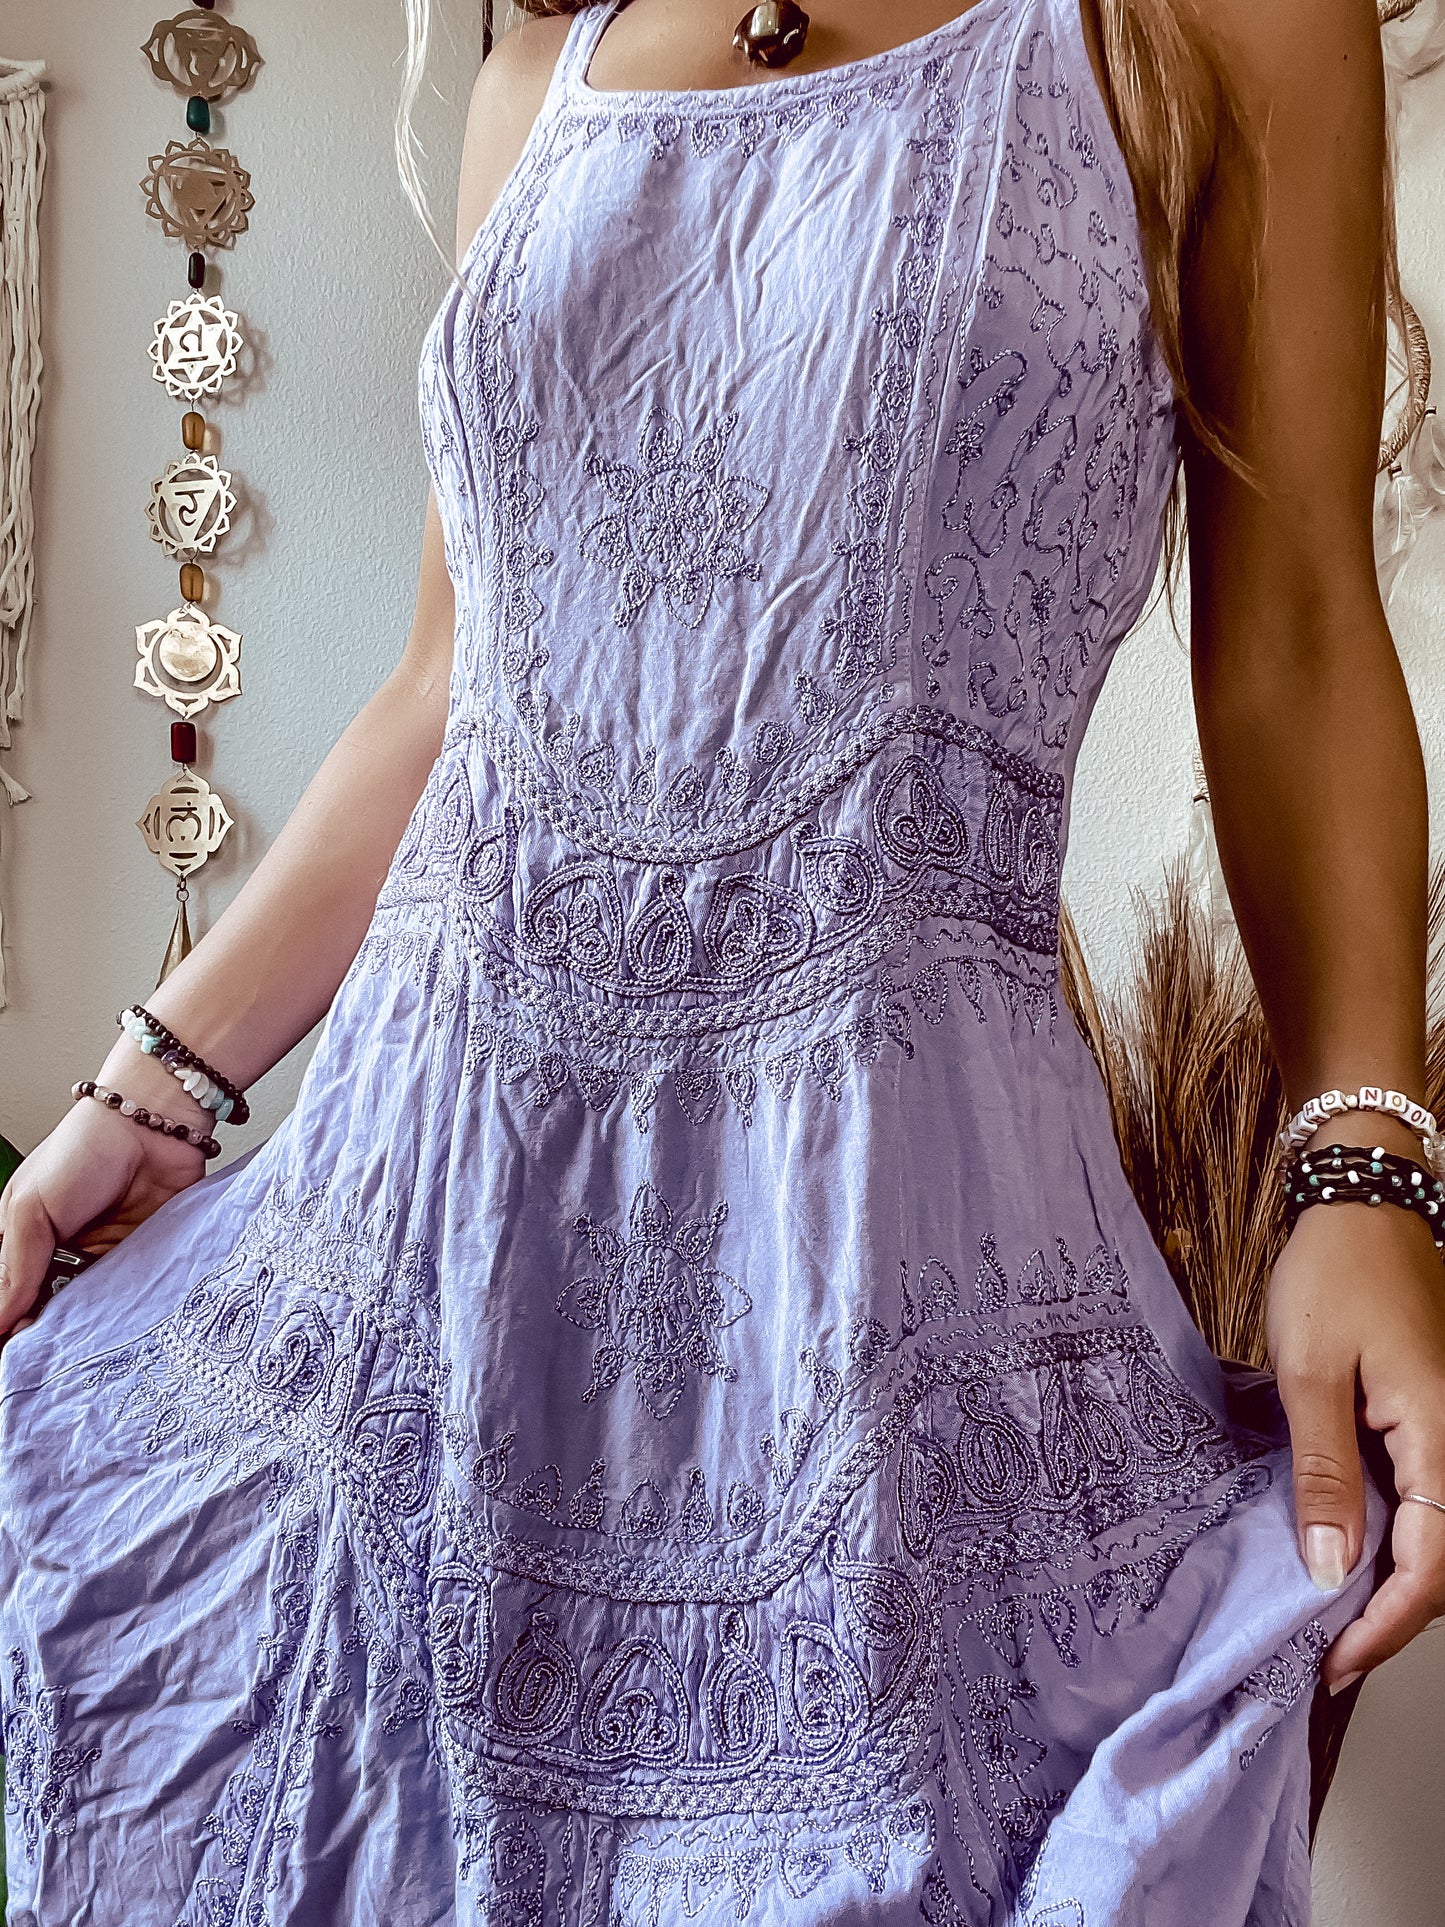 LAVENDER EMBROIDERED FAIRY DRESS